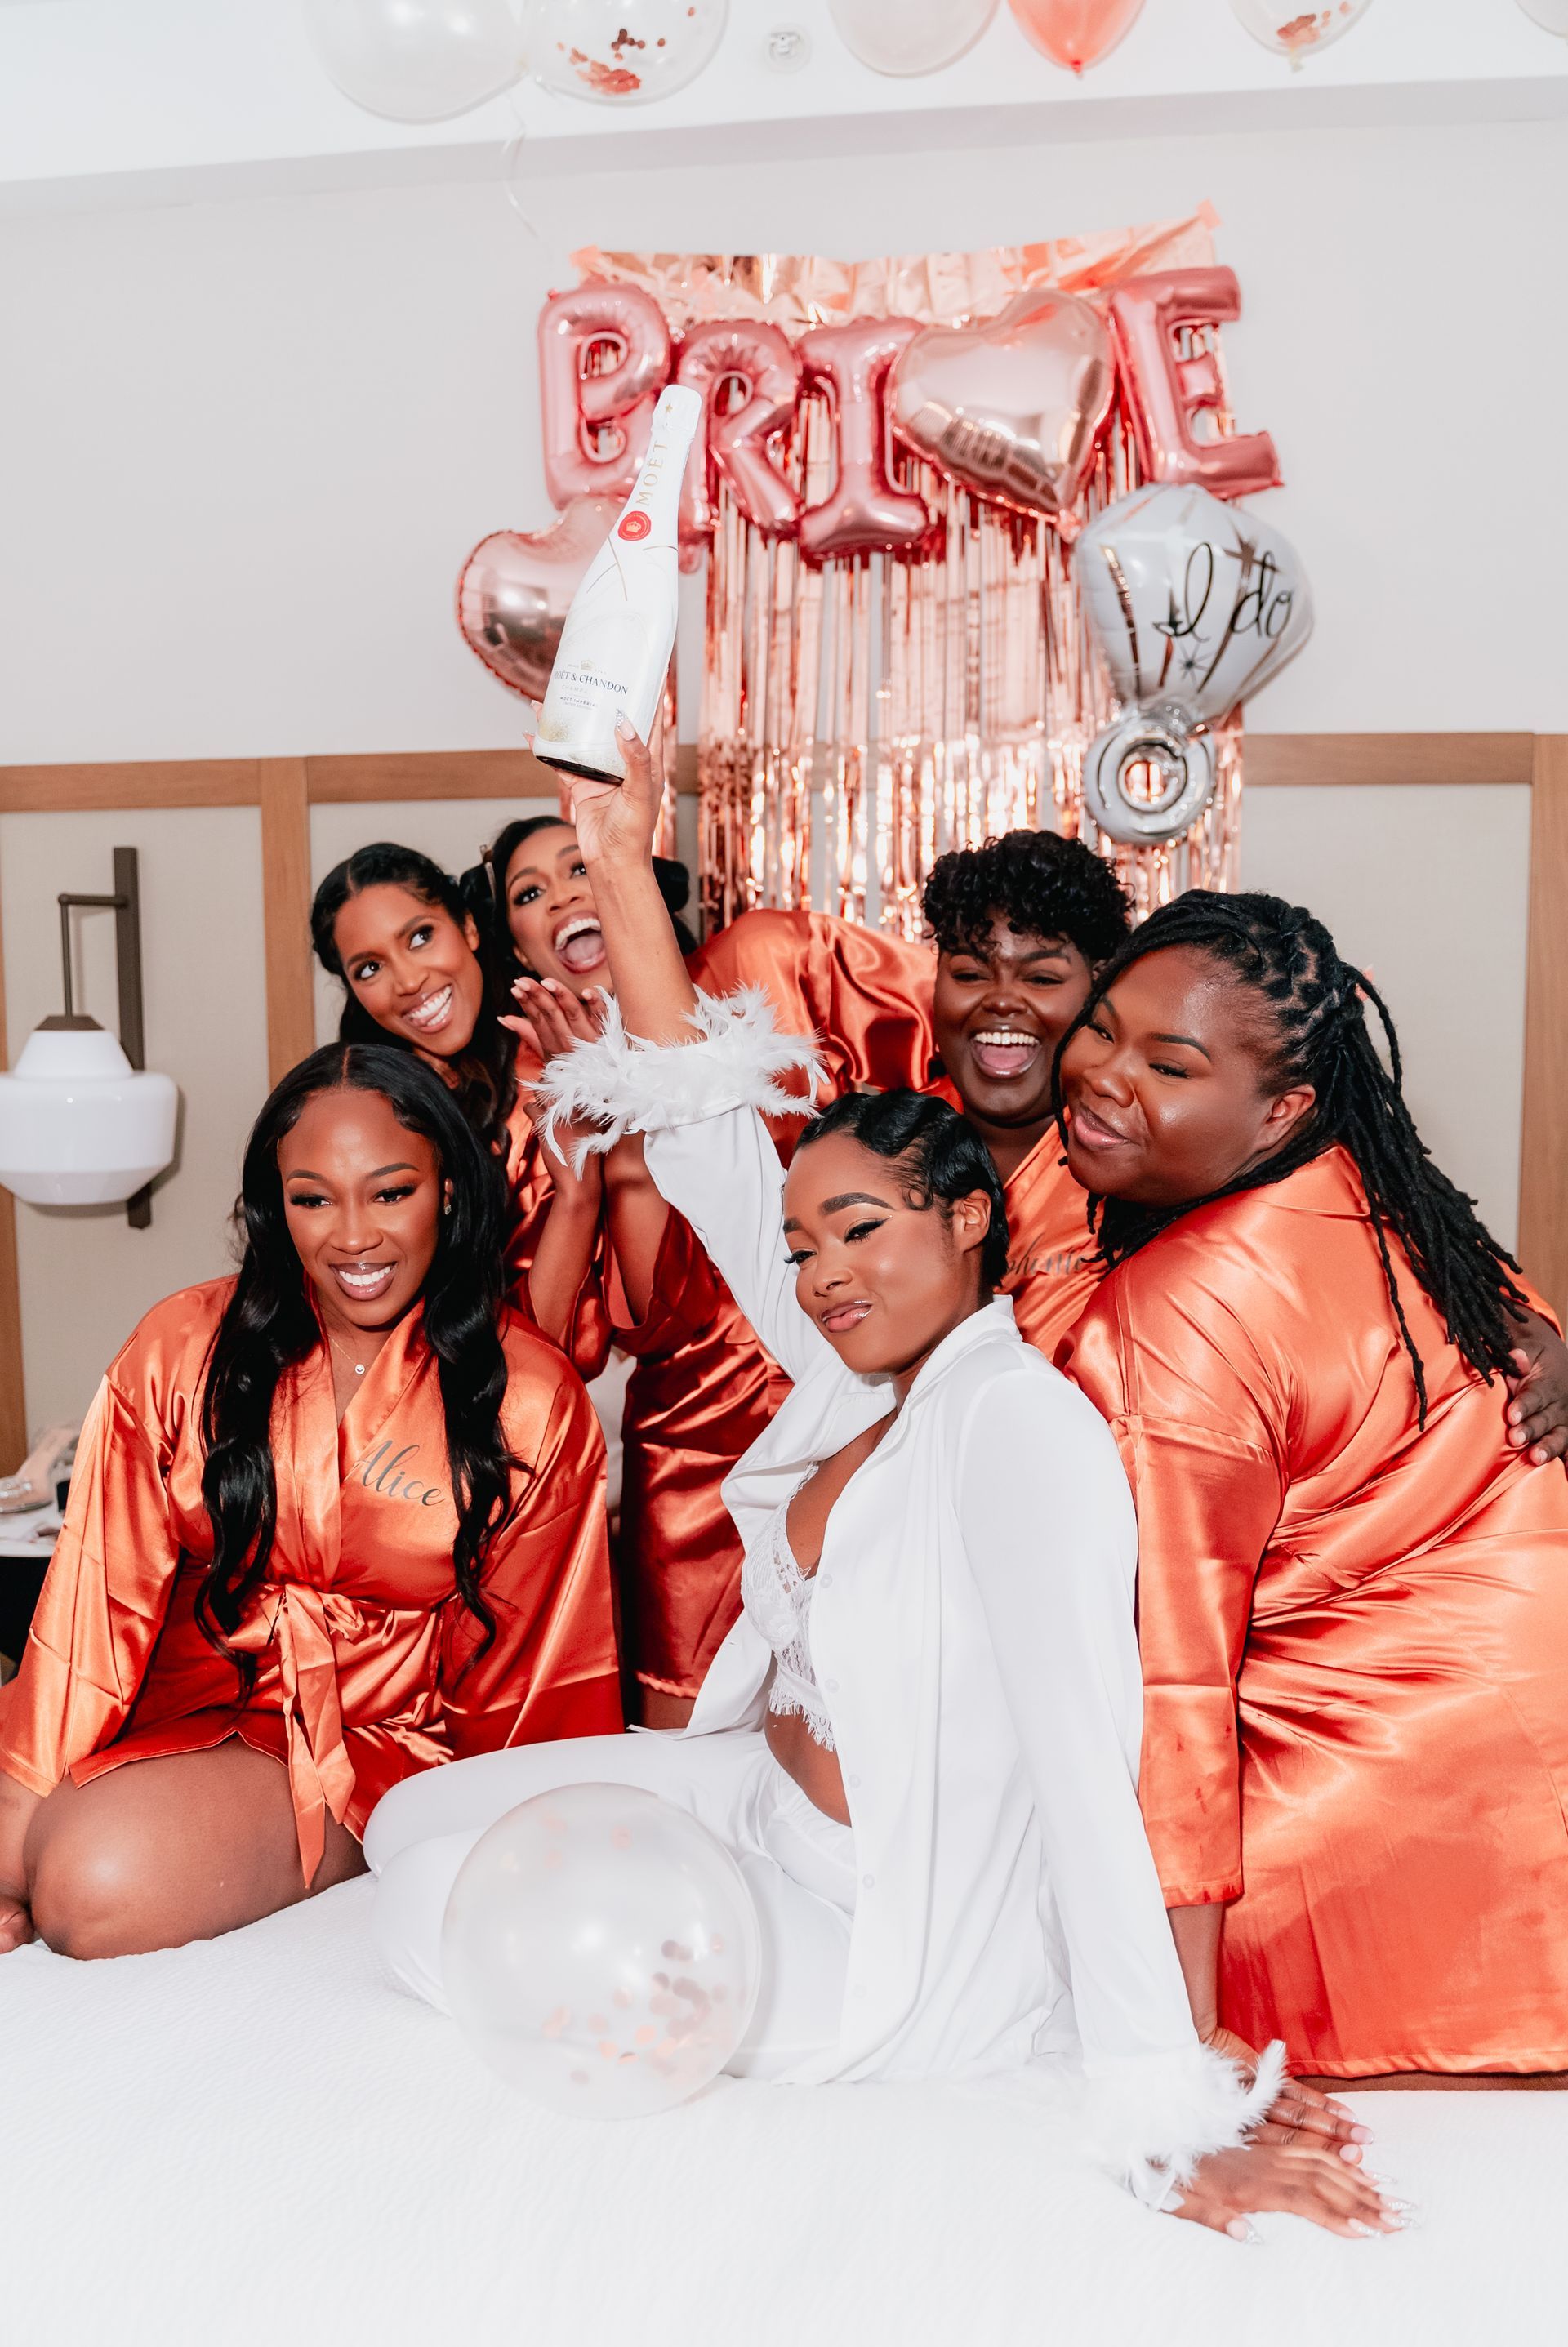 A bride and her bridesmaids are posing for a picture on a bed.